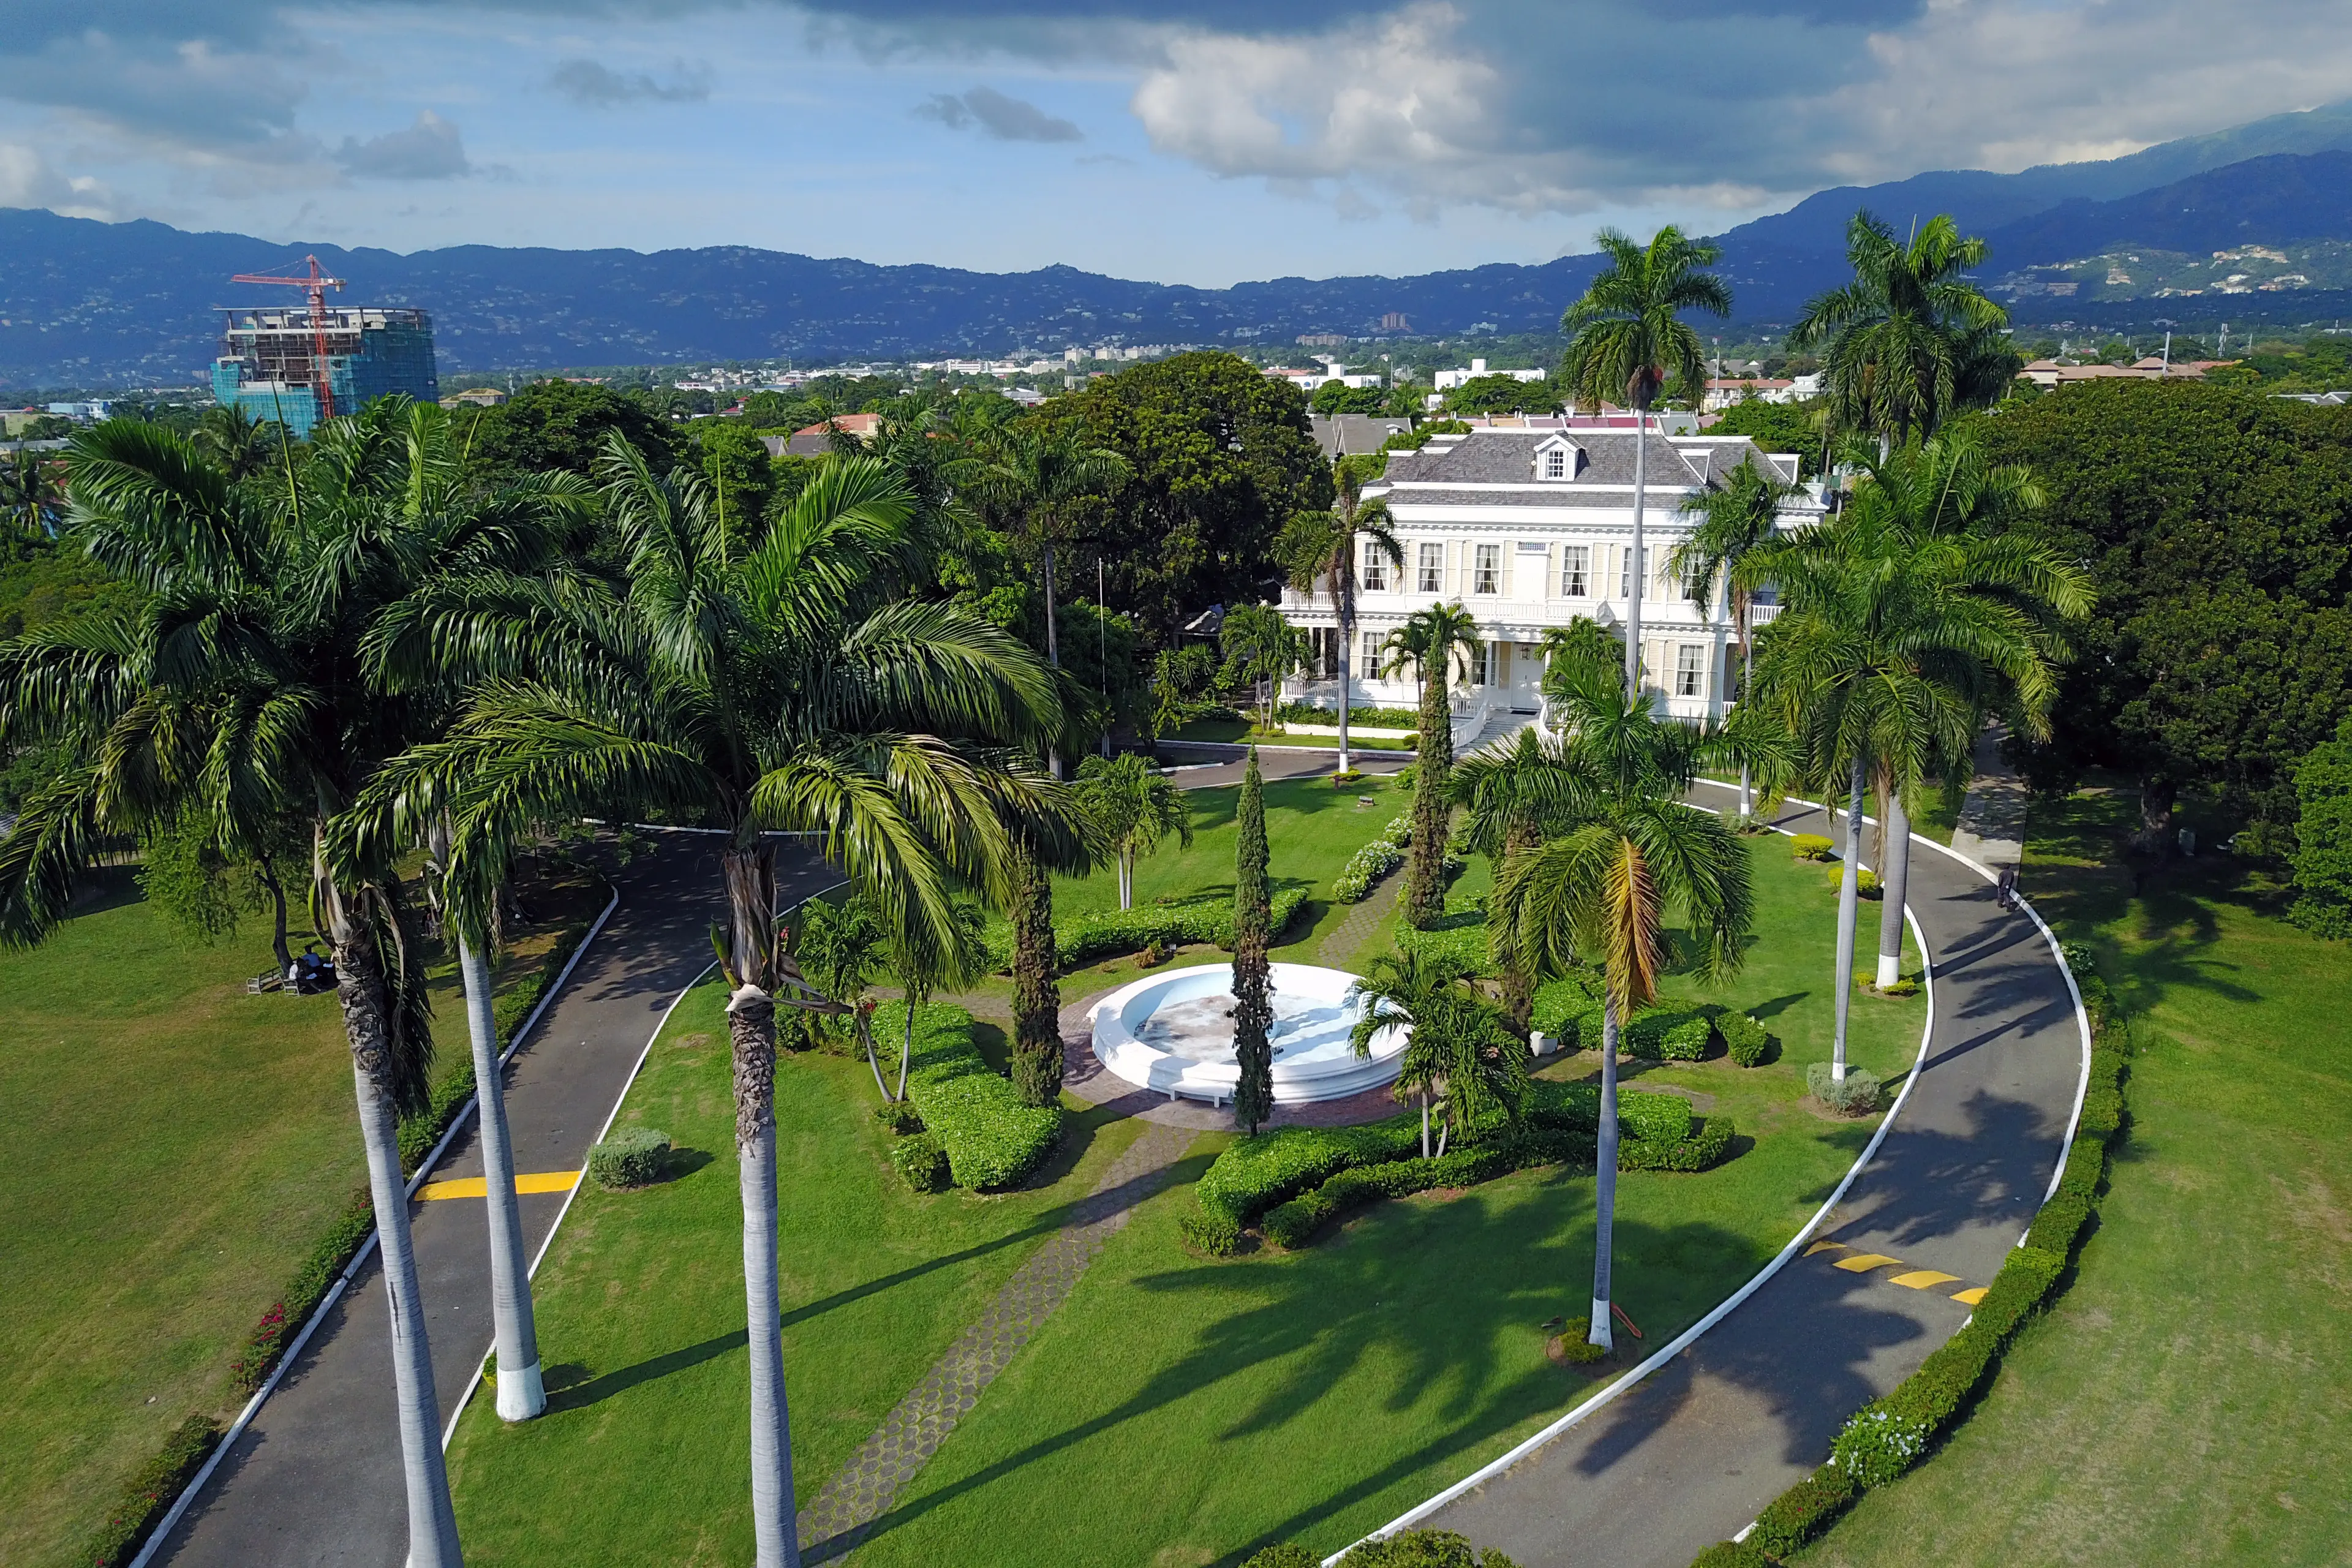 3-Day Adventure Itinerary in Kingston, Jamaica